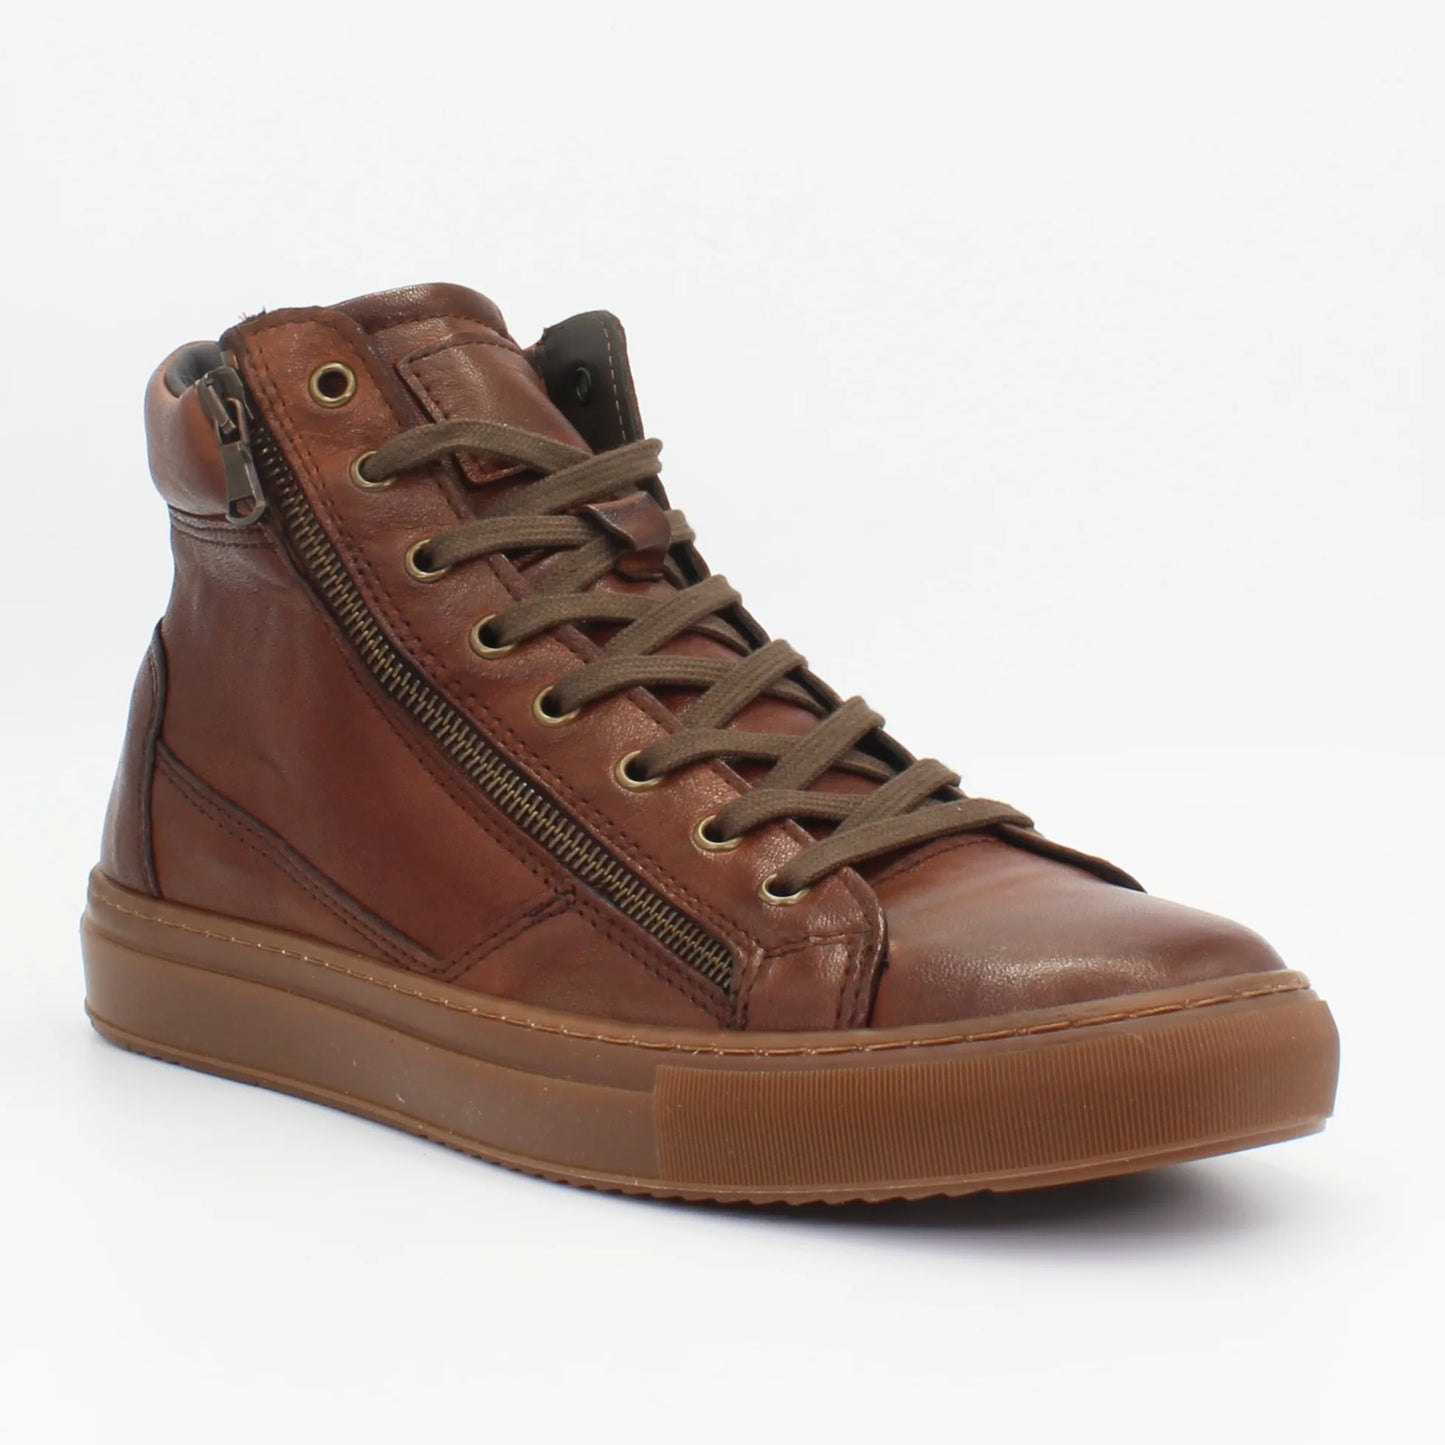 Shop Handmade Italian Leather High Top Sneaker in Cuoio (Cairo) or browse our range of hand-made Italian shoes for men in leather or suede in-store at Aliverti Cape Town, or shop online. We deliver in South Africa & offer multiple payment plans as well as accept multiple safe & secure payment methods.